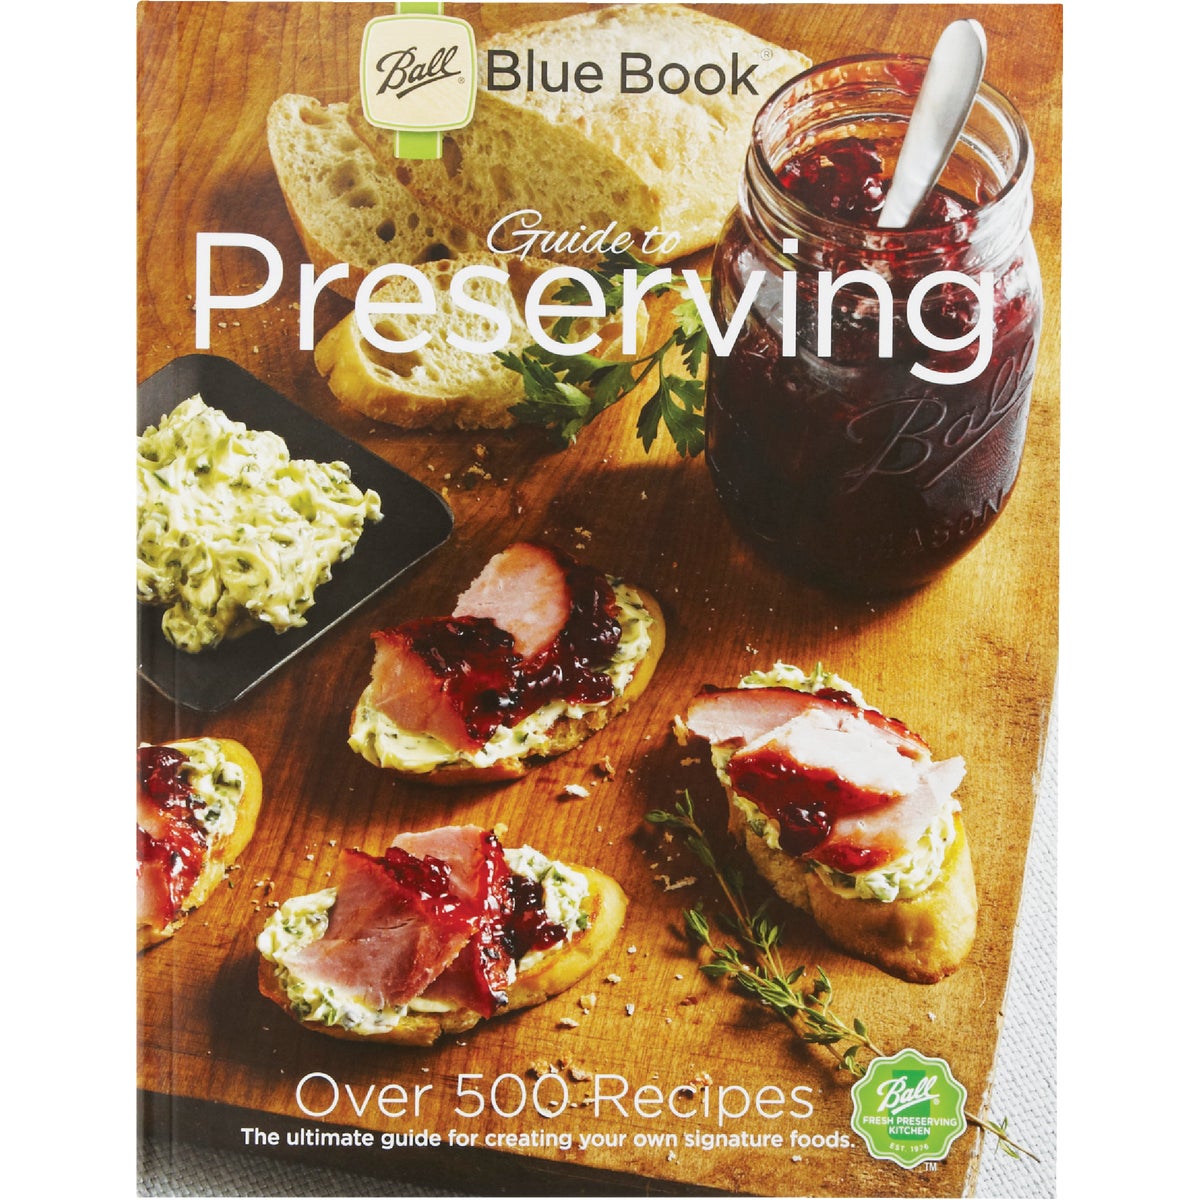 Item 602333, The ultimate guide for creating your own signature foods.